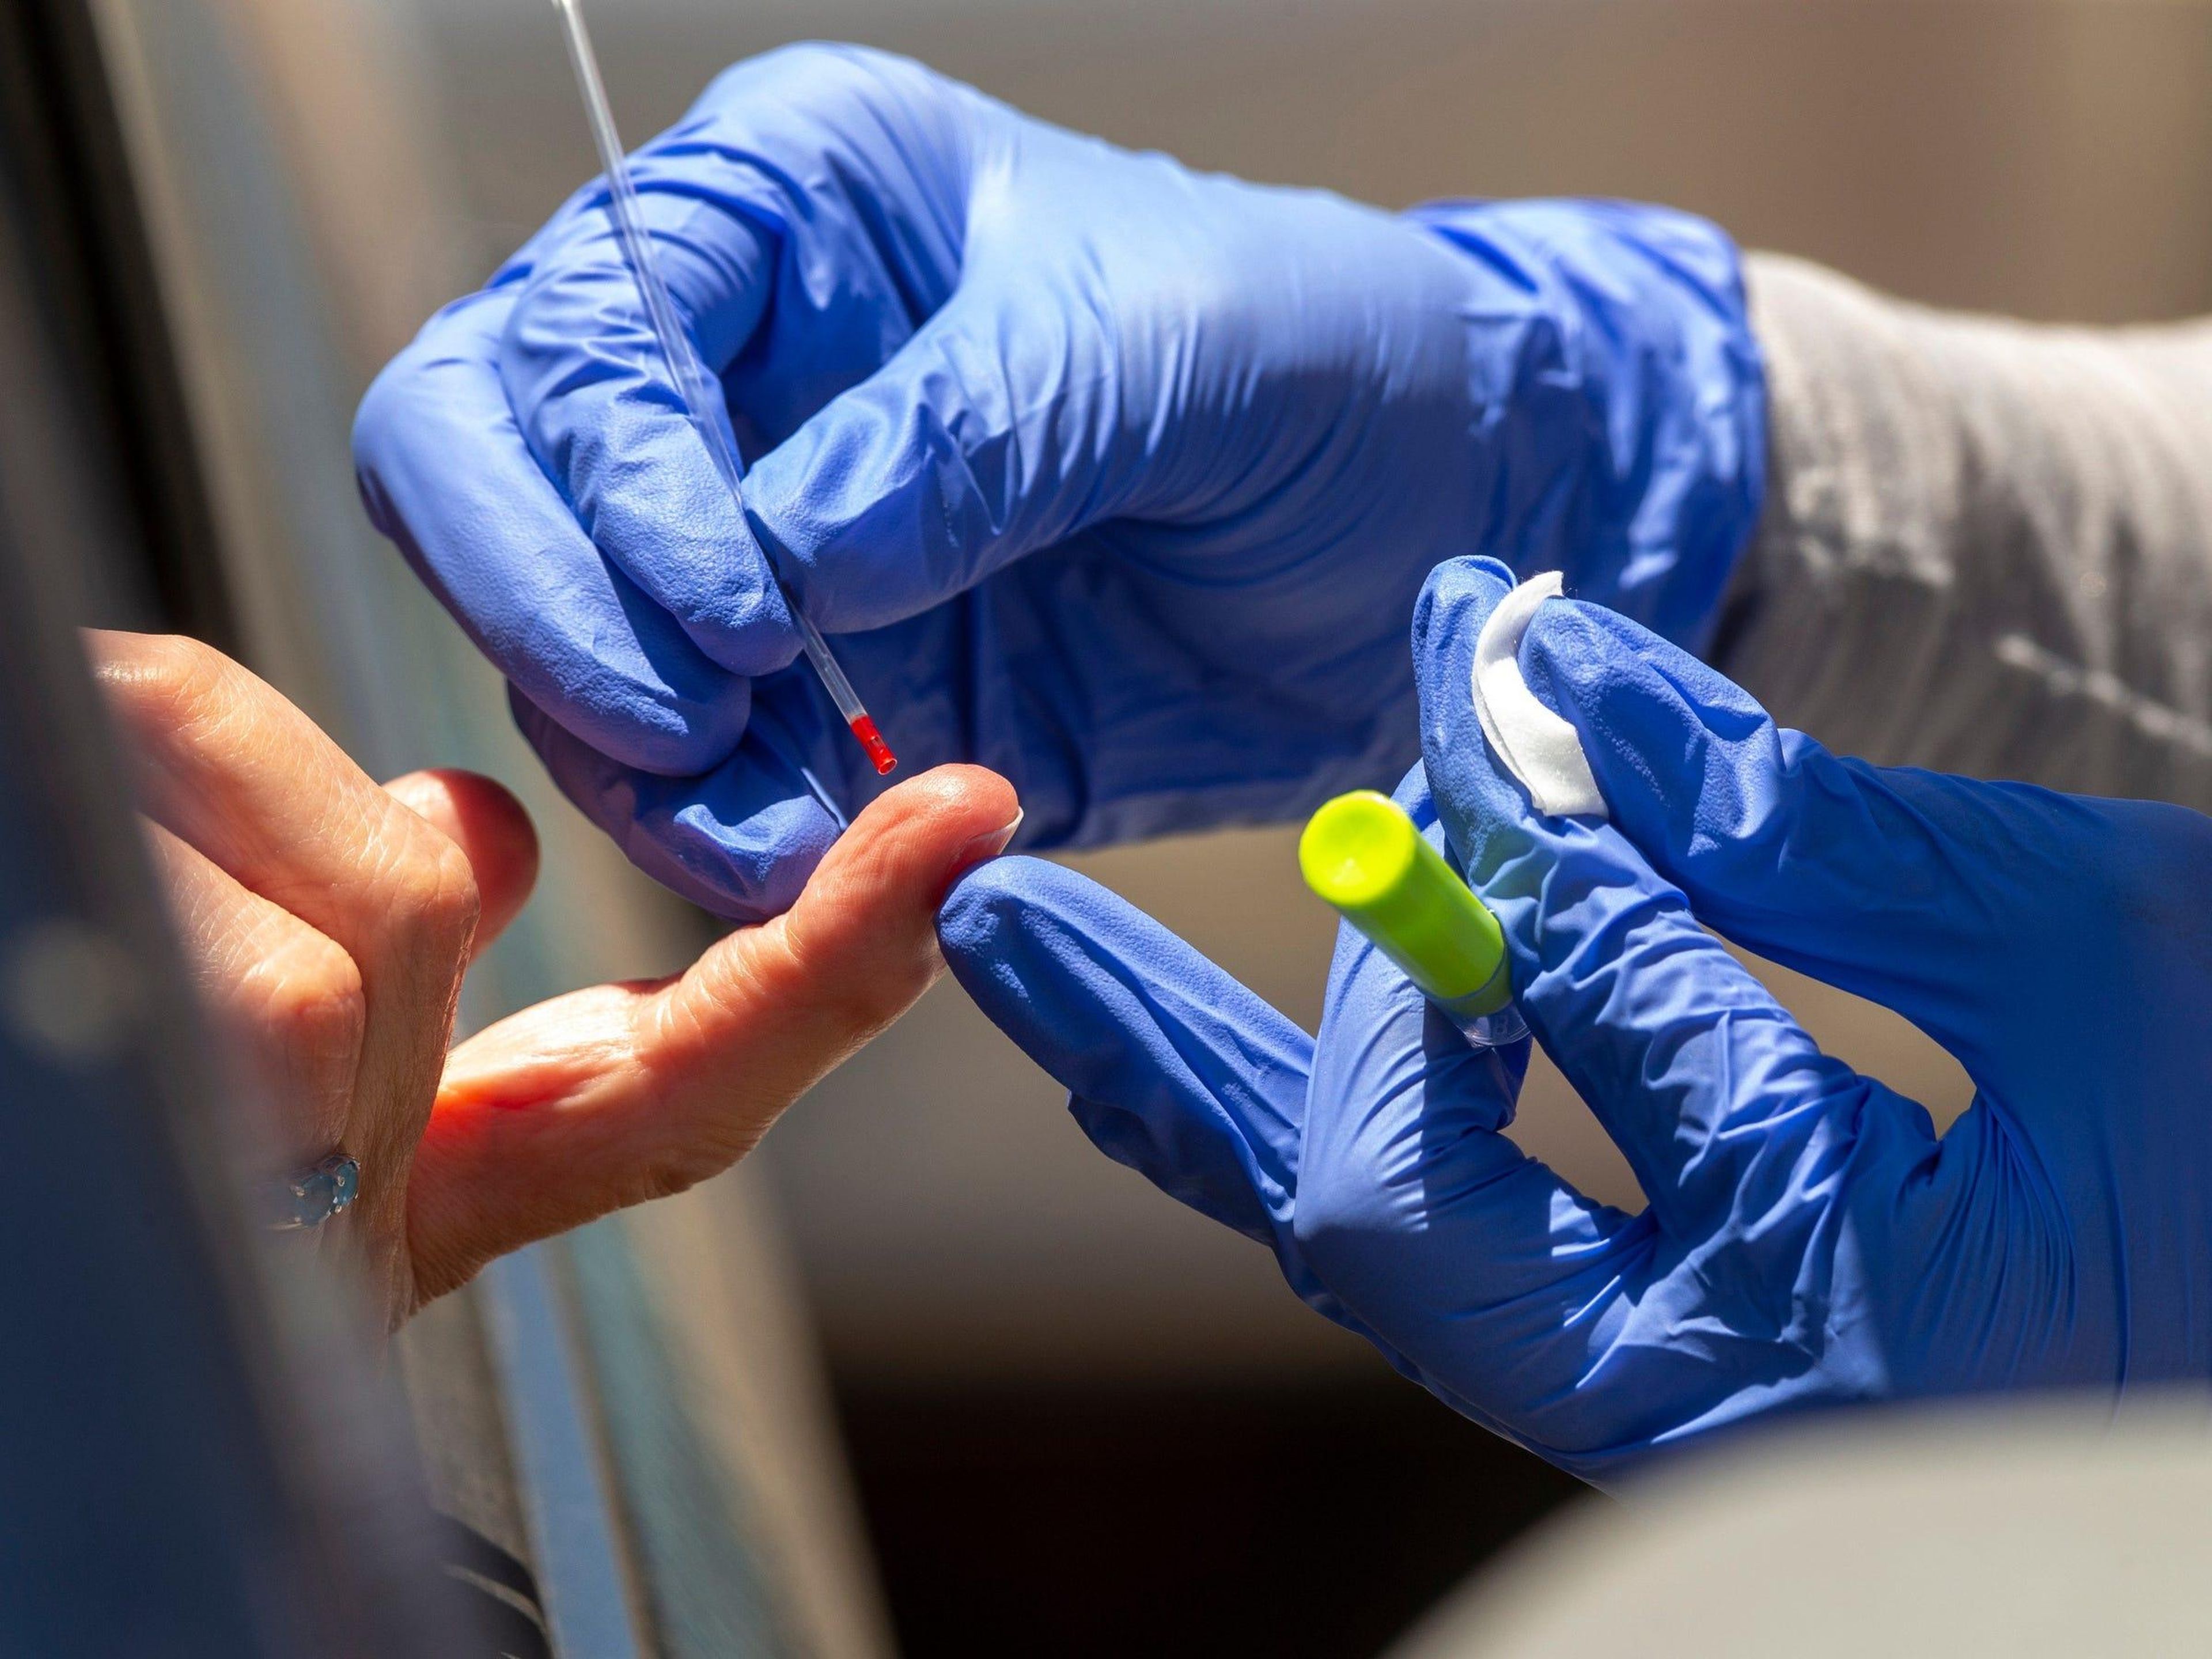 A health worker takes a blood sample for a COVID-19 antibody test in Los Angeles, California, May 20, 2020.